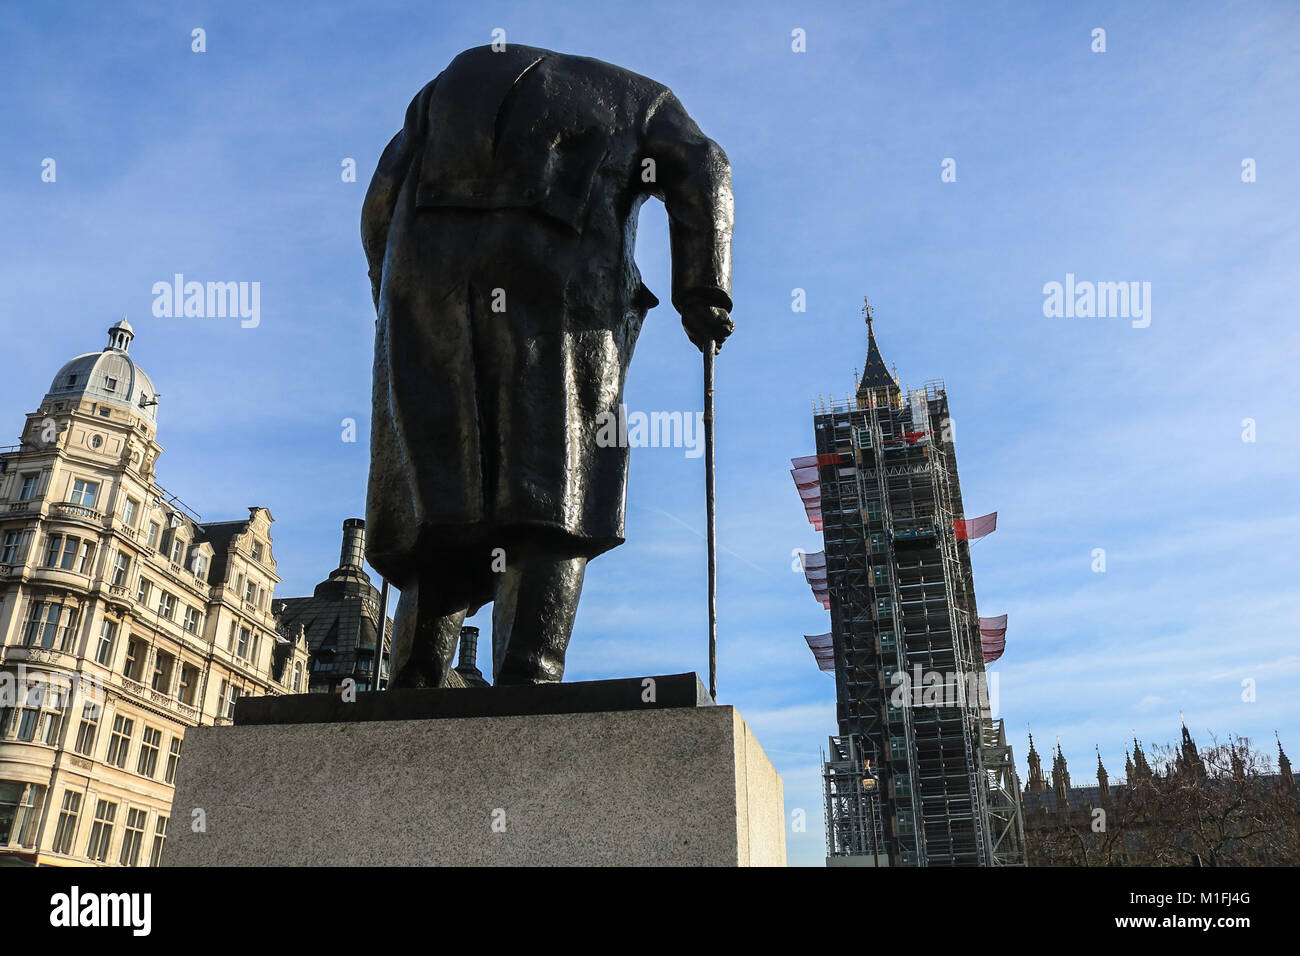 London, UK. 30th Jan, 2018. A controversial proposal for both Members of the Houses of Parliament to vacate the Palace of Westminster and move to temprary accomodation whilst the £3.5bn restoration works are carried out for six years. The Labour chair of the public accounts committee, Meg Hillier believes a comprehensive refurbishment is necessary Credit: amer ghazzal/Alamy Live News Stock Photo